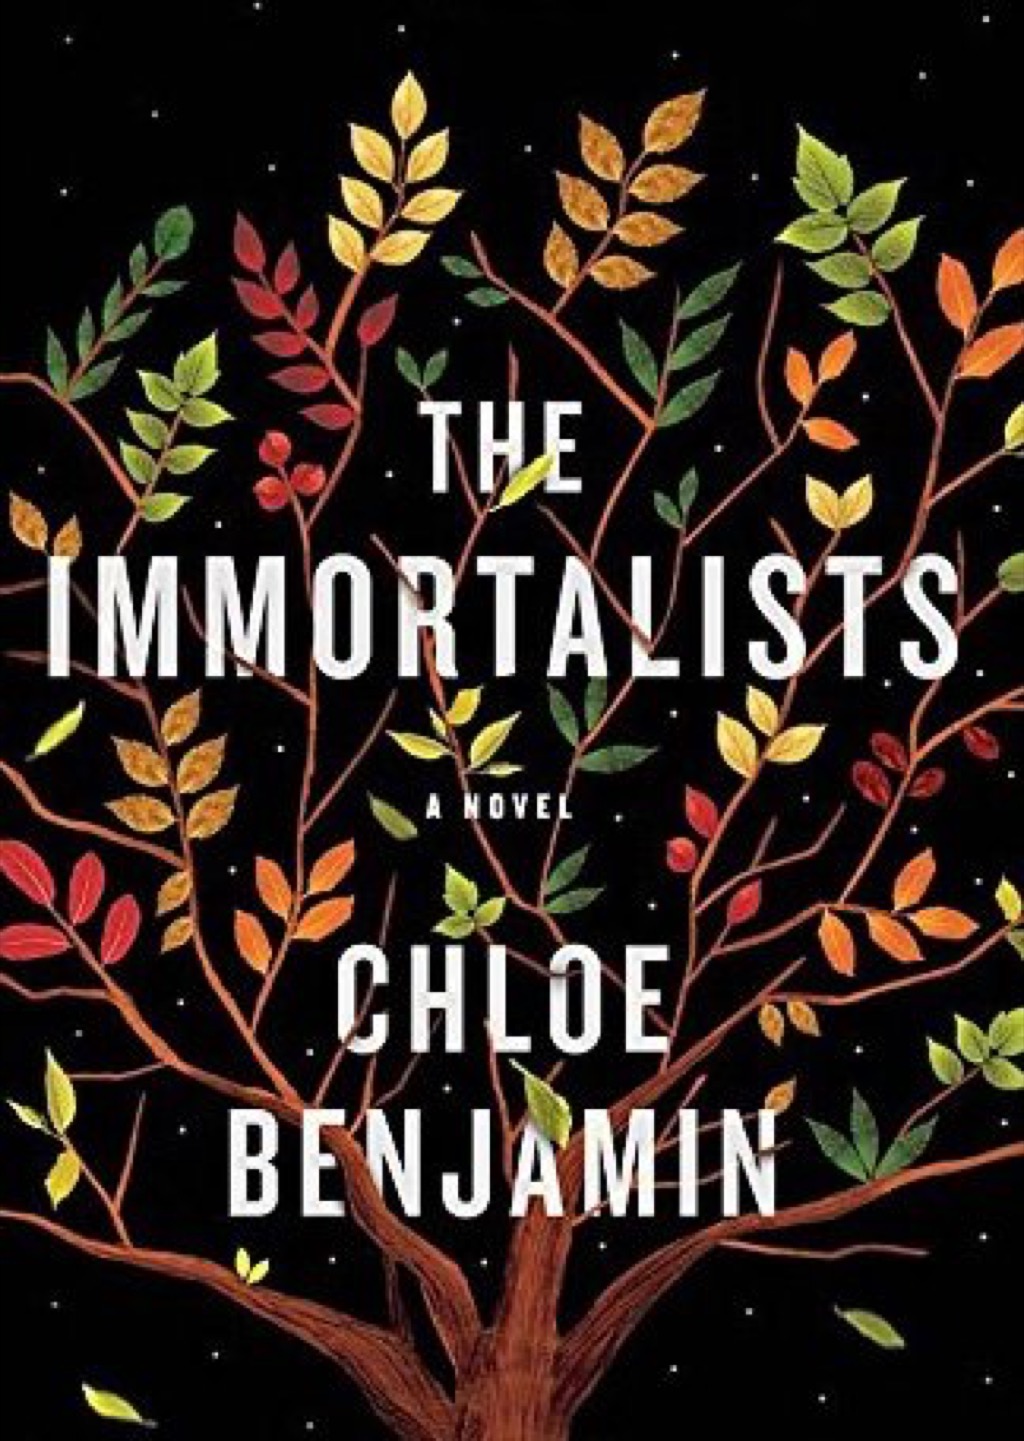 The Immortalists books every woman should read in her 40s